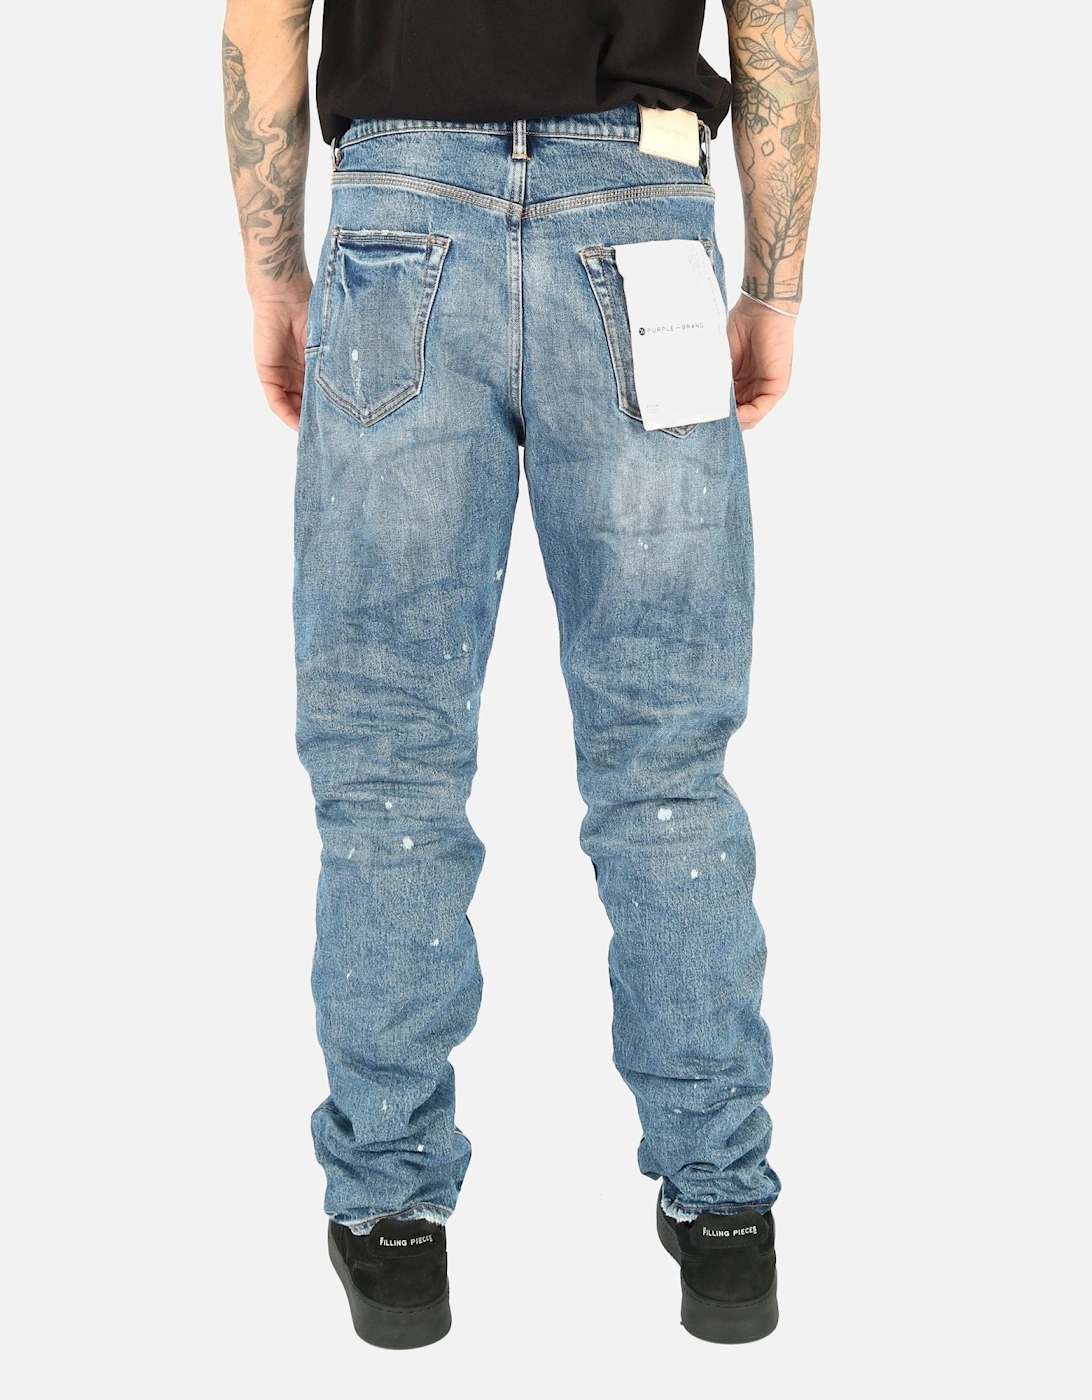 Patch Ripped Knee Paint Straight Fit Stetch Jean